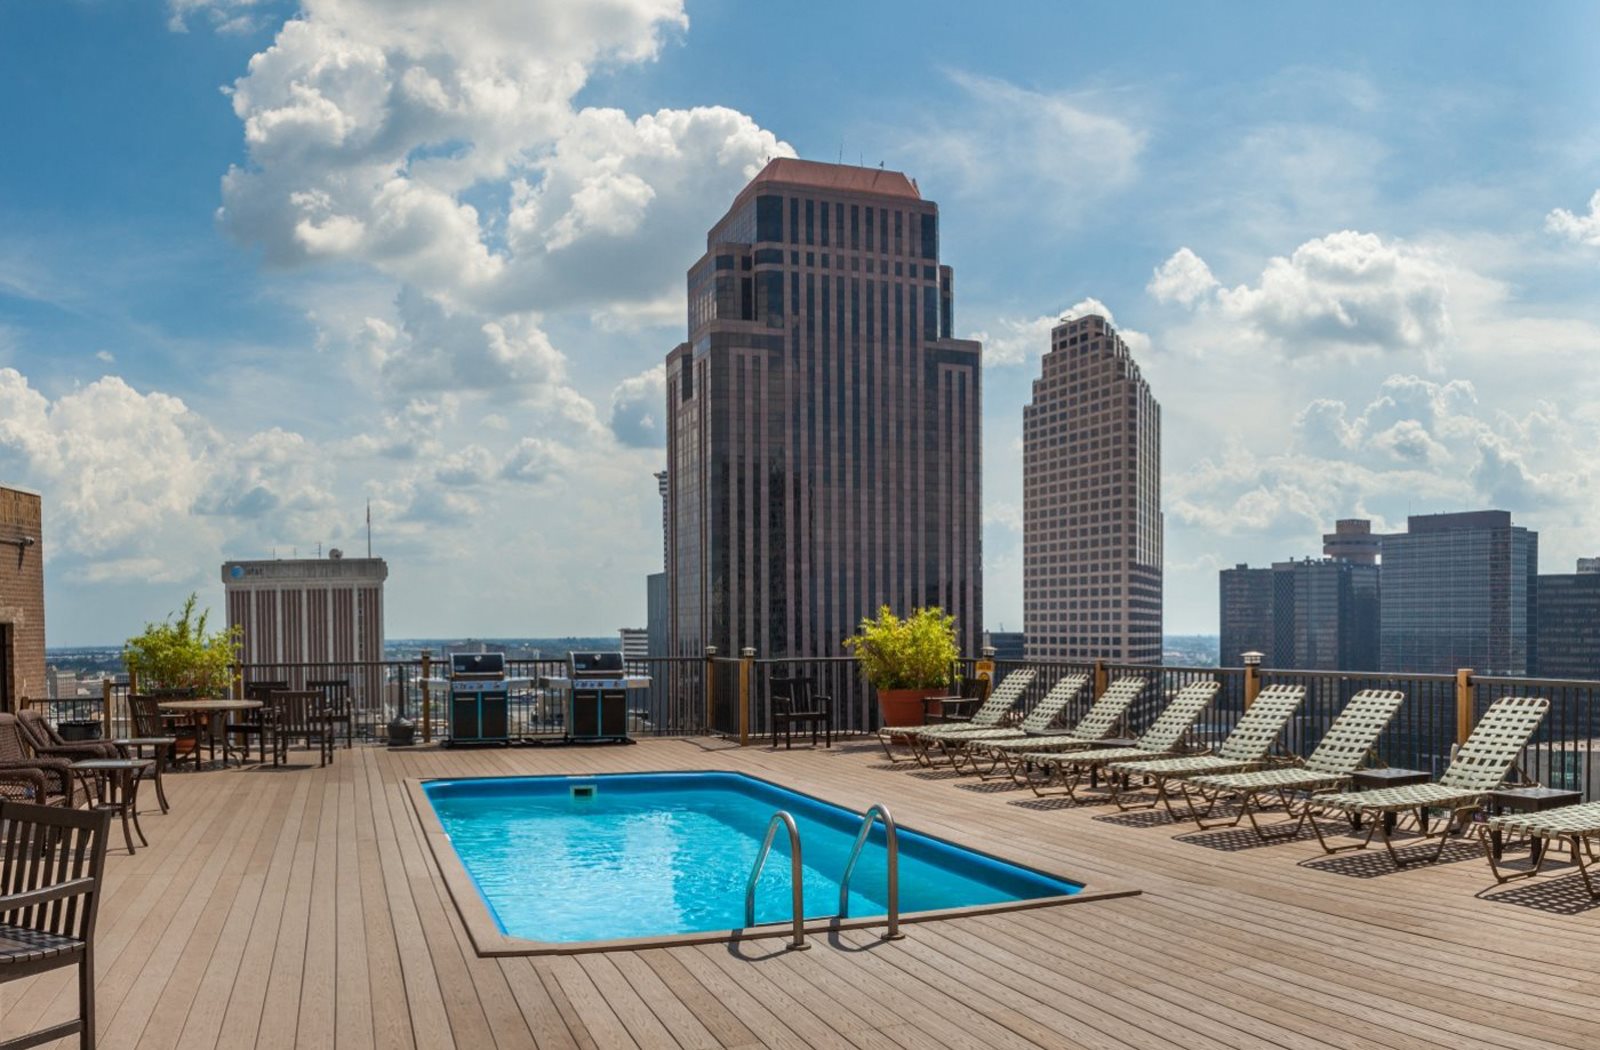 Gravier Place Apartments, Apartments in New Orleans, LA